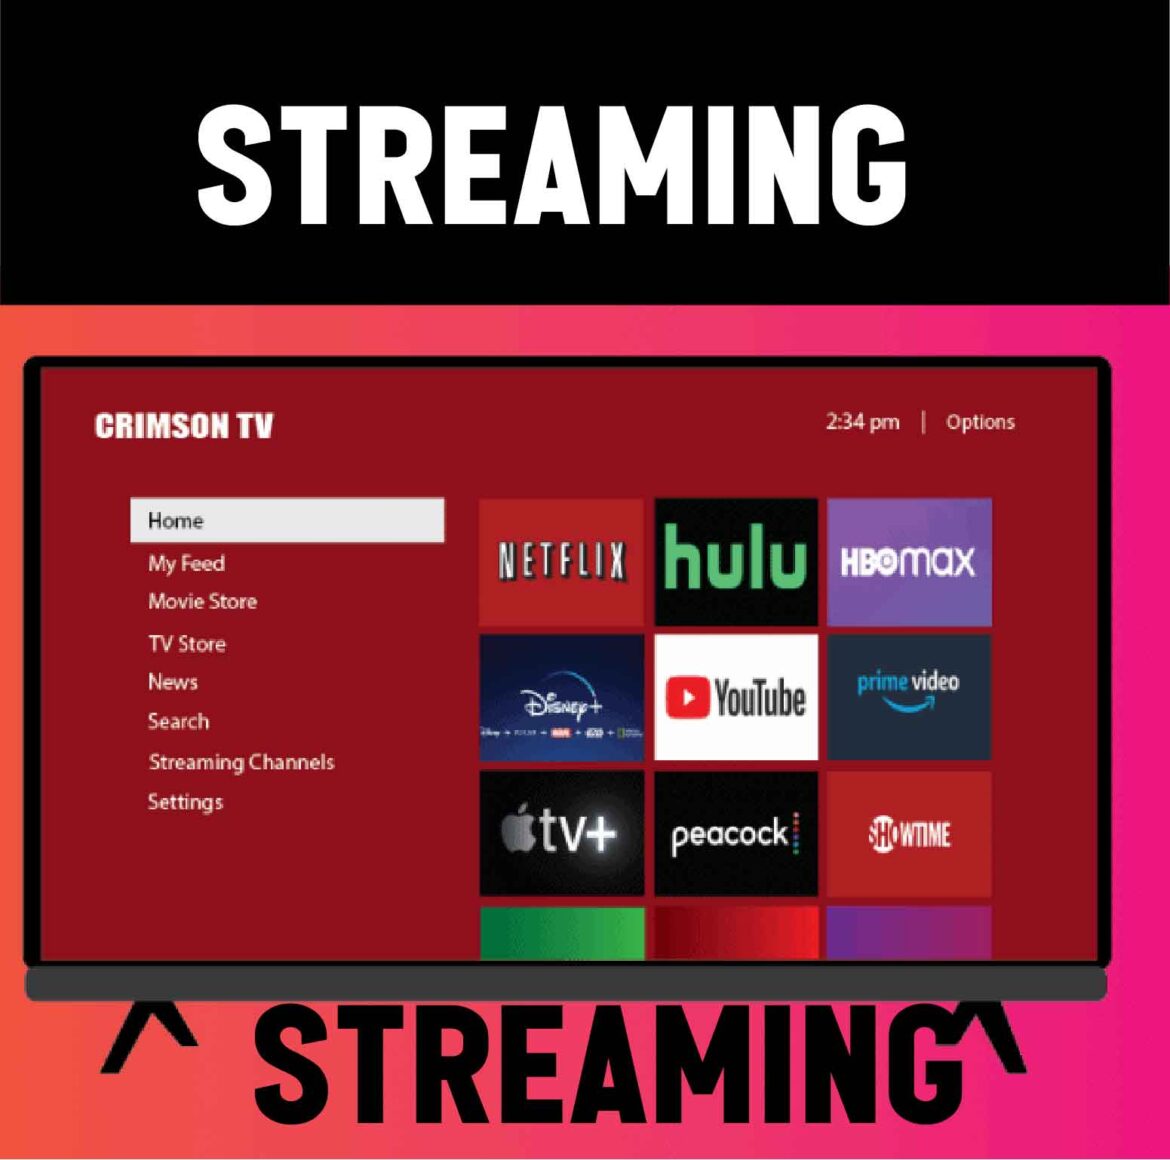 What Content Variety Do Streaming Apps Offer for Binge-Streamers?